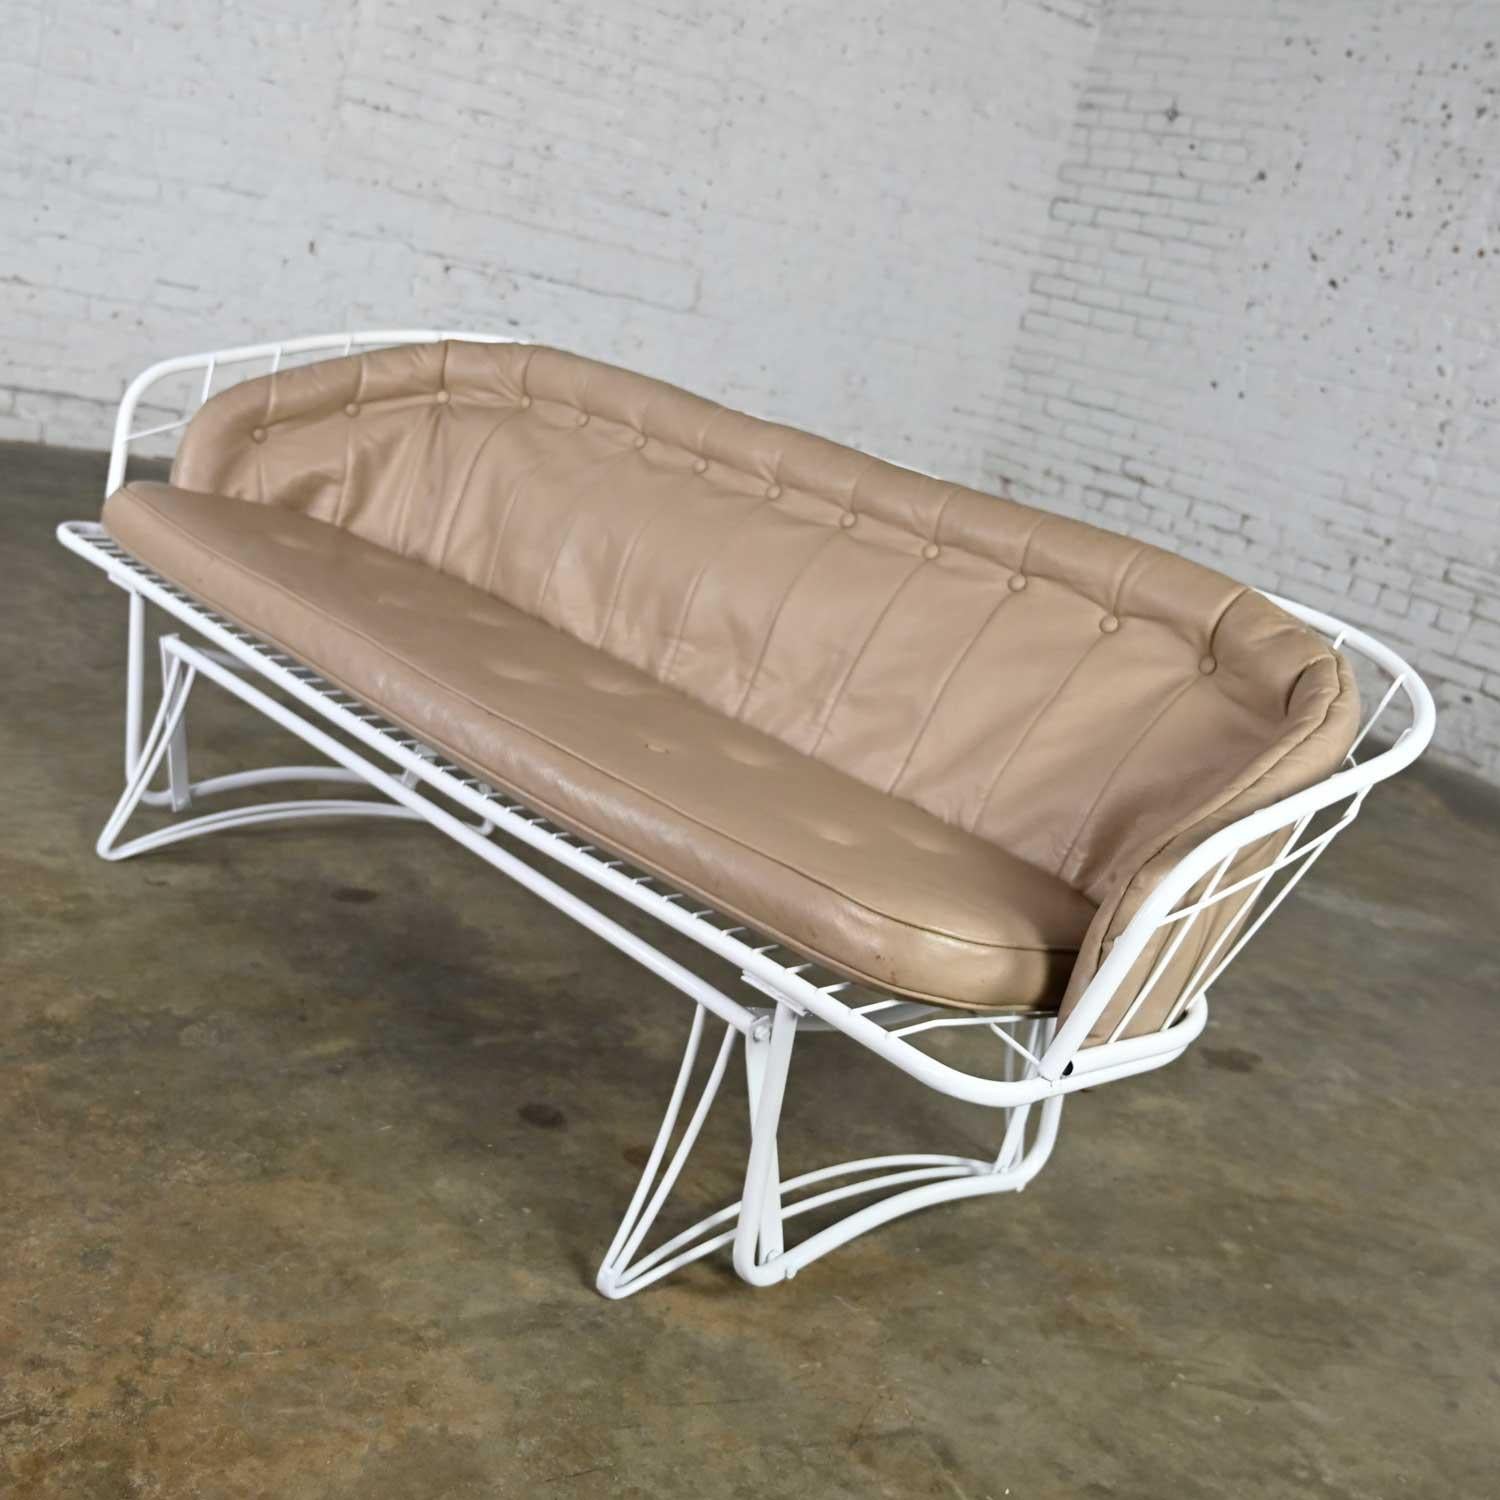 Wonderful Mid-Century Modern Homecrest white painted metal glider with taupe vinyl cushions and button detail. Beautiful condition, keeping in mind that this is vintage and not new so will have signs of use and wear. It has been completely